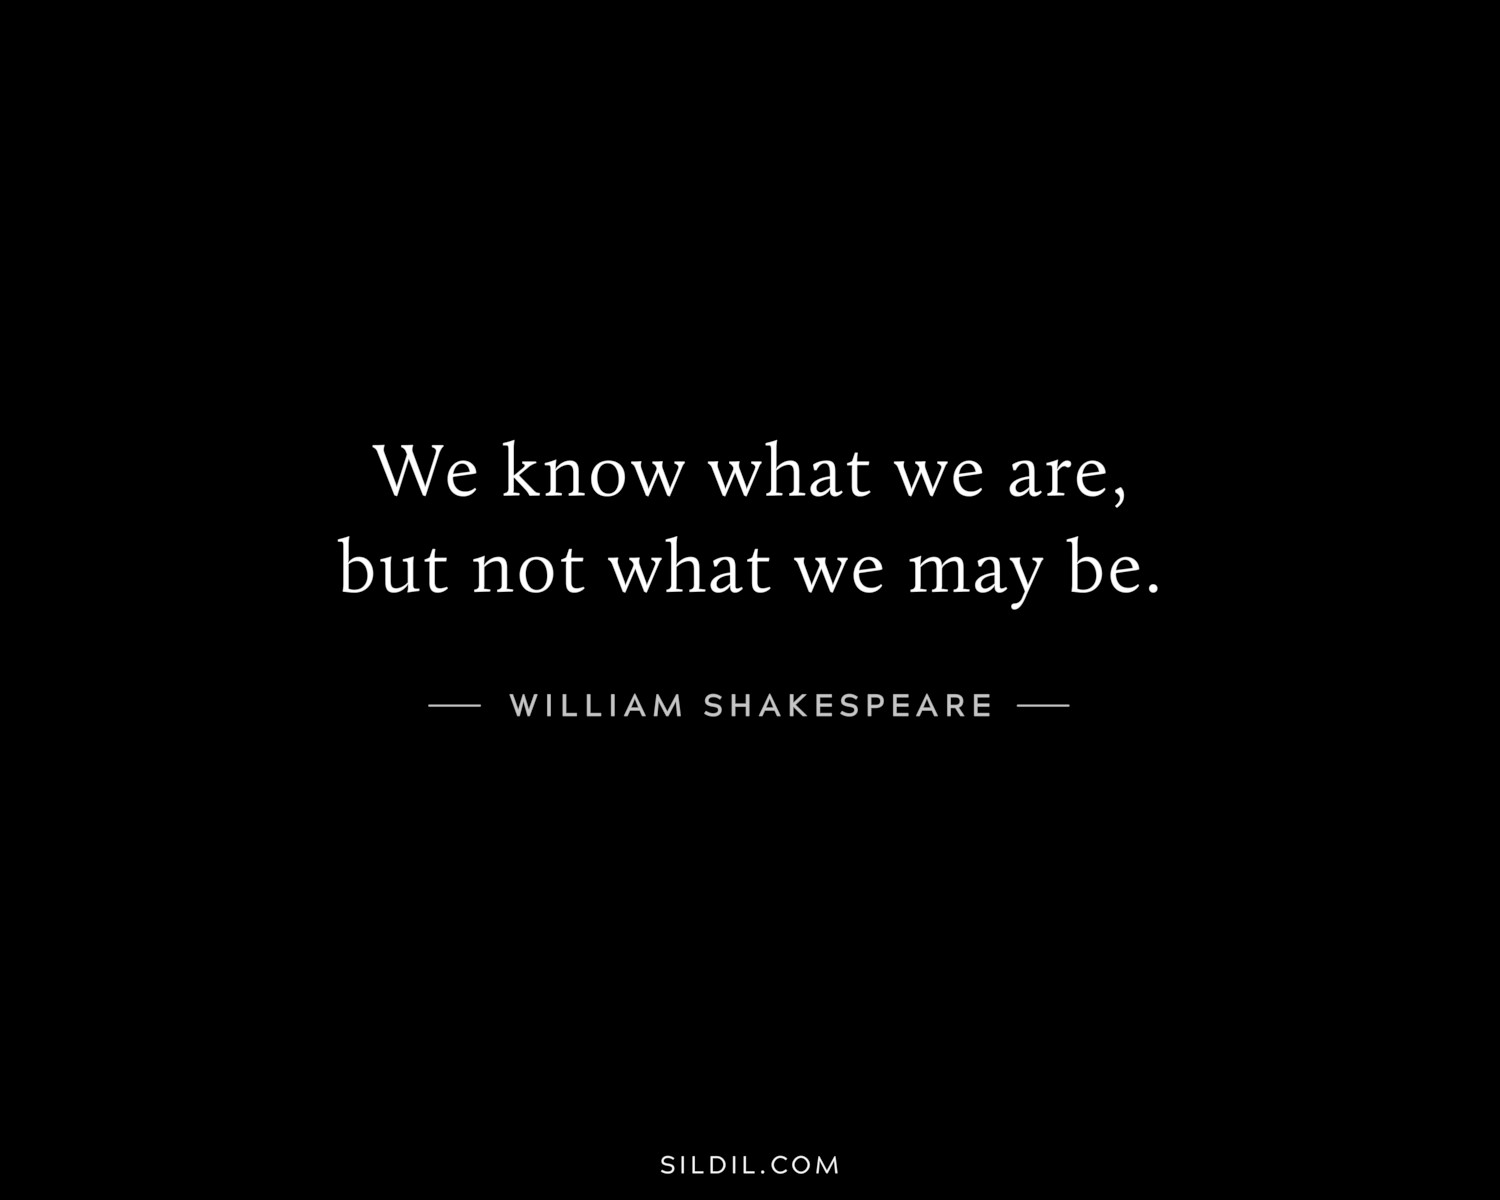 We know what we are, but not what we may be.